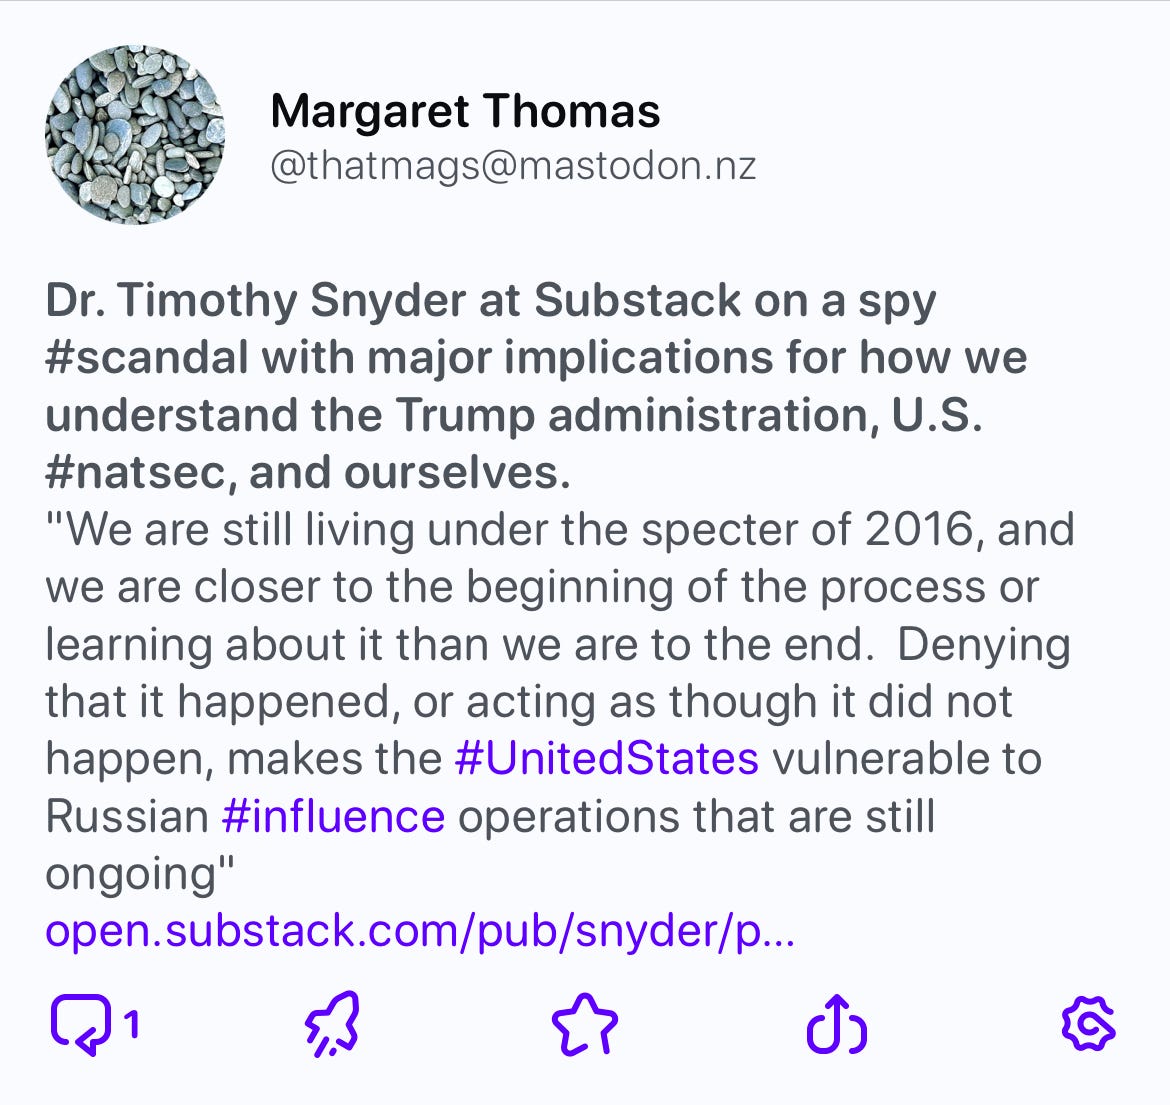 Mastodon post with the same text as before, but now revealing the text ""We are still living under the specter of 2016, and we are closer to the beginning of the process or learning about it than we are to the end. Denying that it happened, or acting as though it did not happen, makes the #UnitedStates vulnerable to Russian #influence operations that are still ongoing""